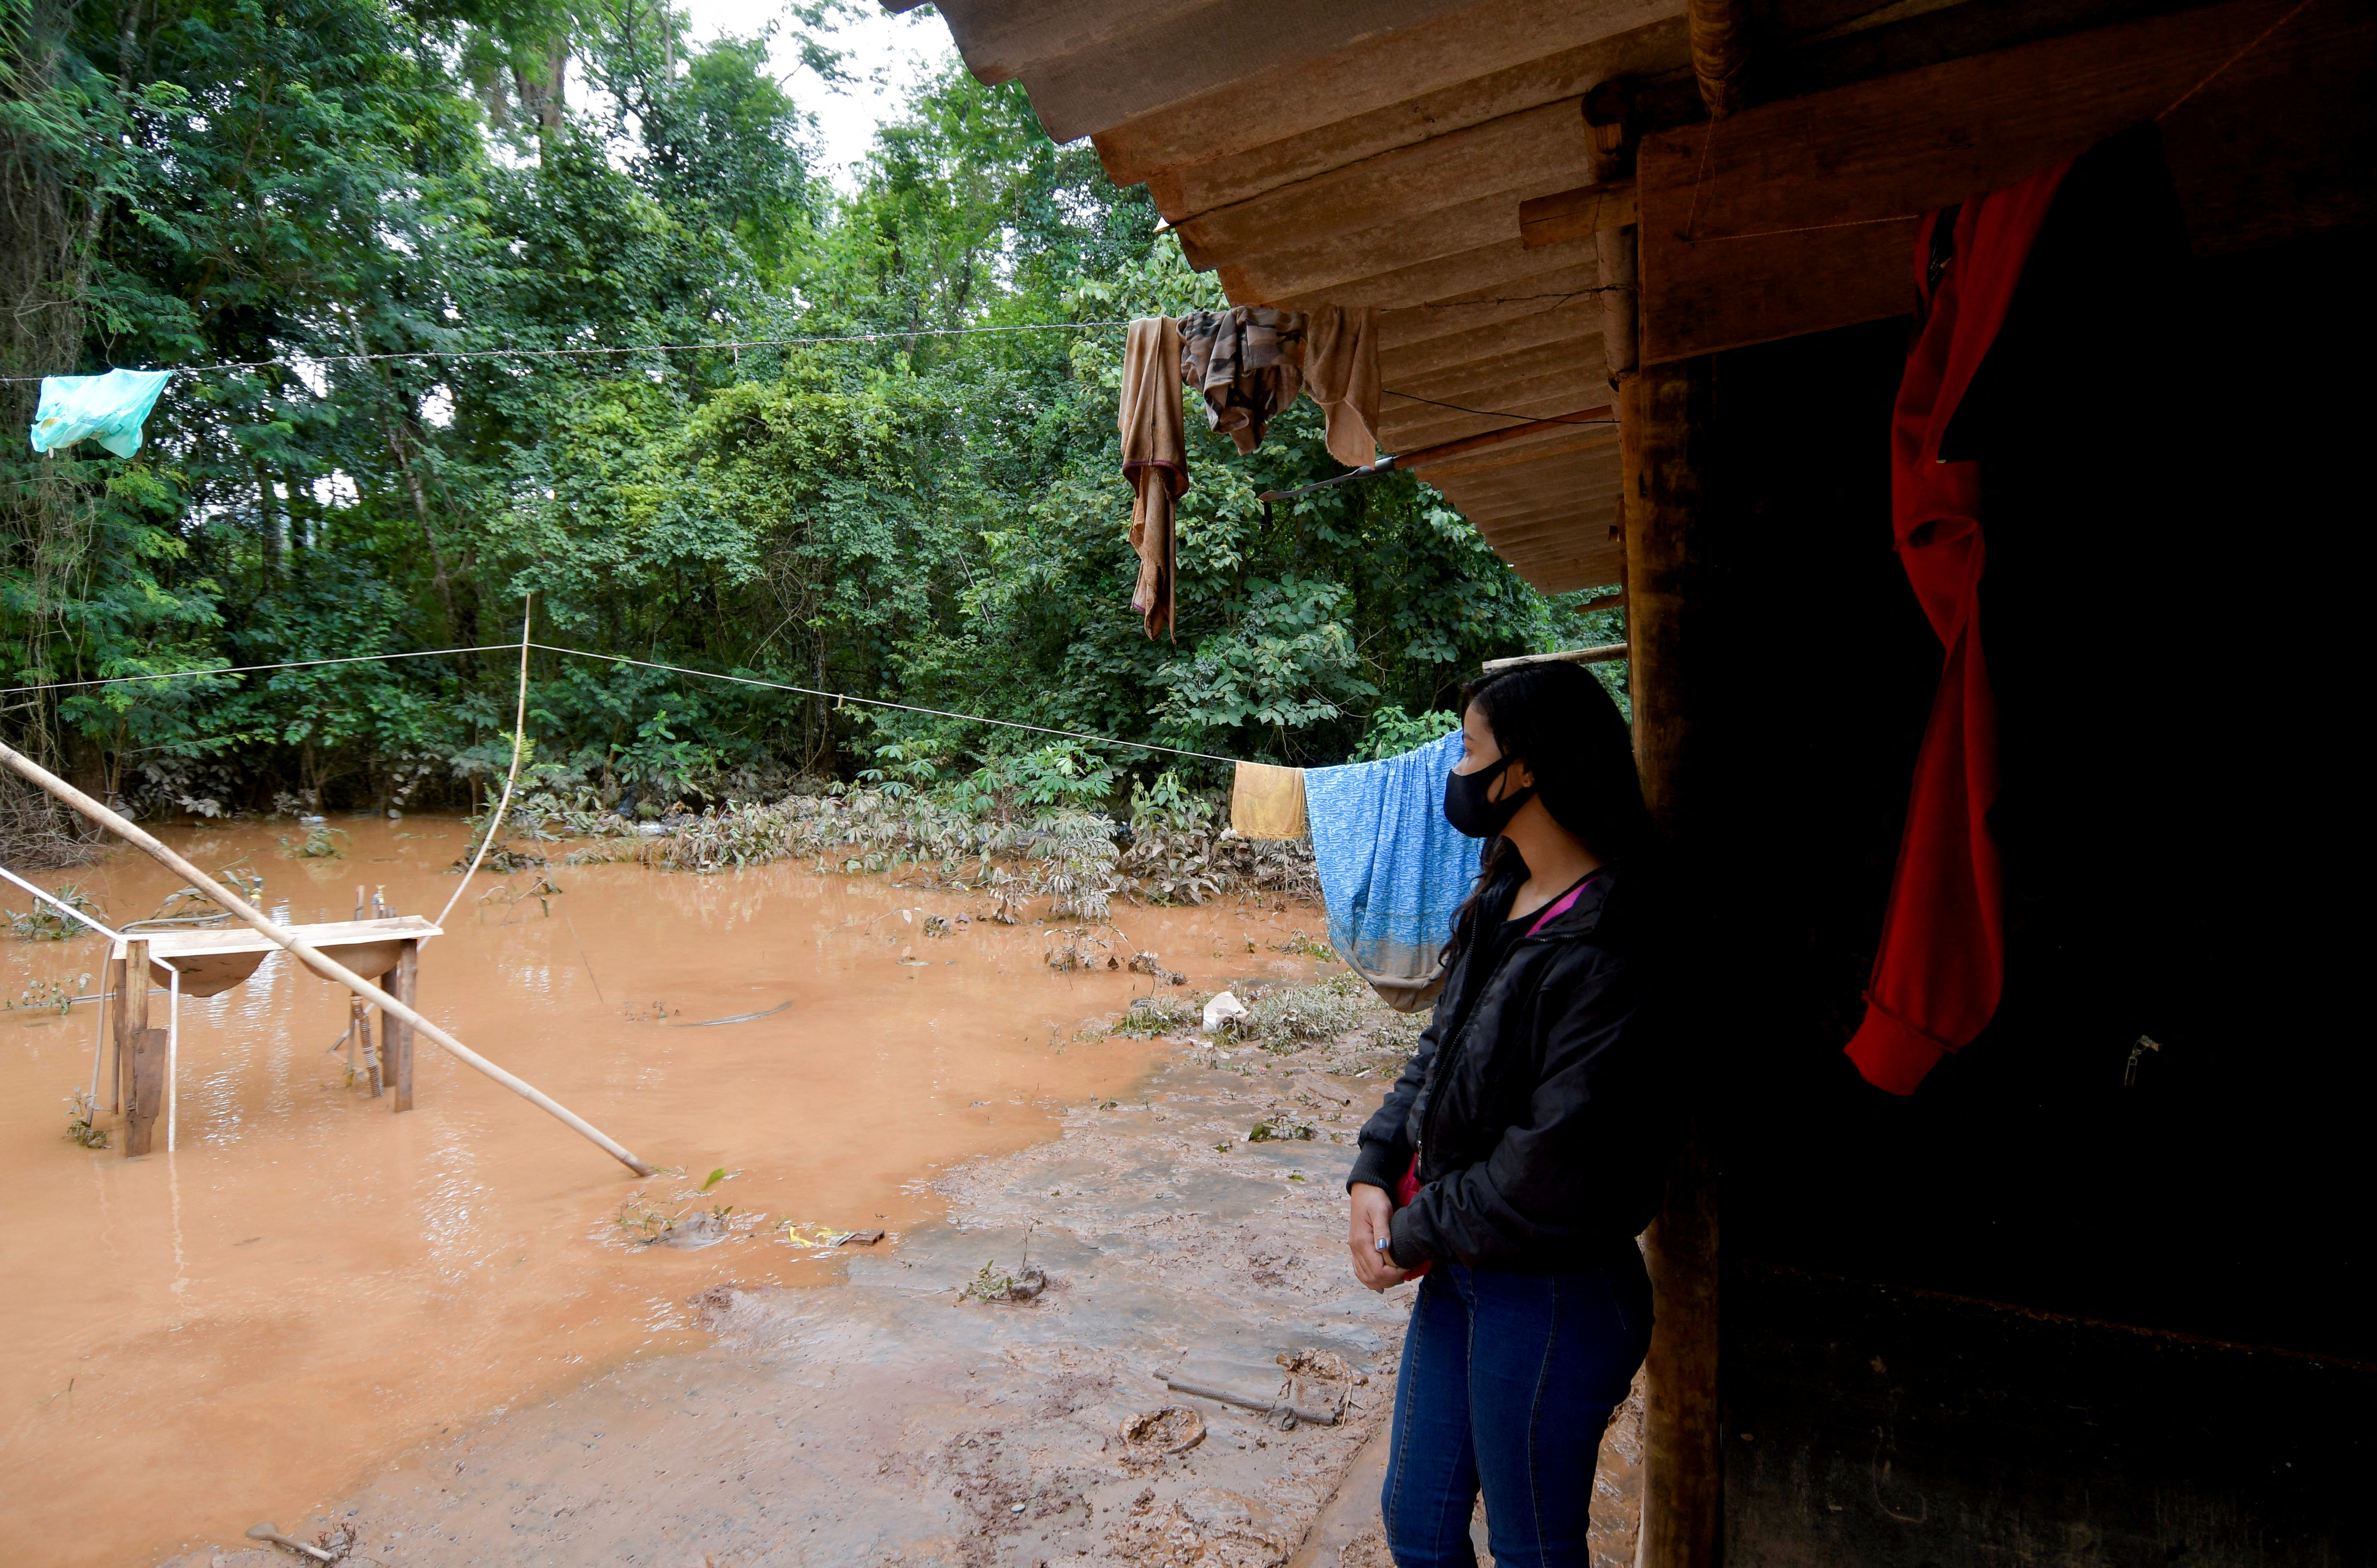 An indigenous woman of the Pataxo ethnicity observes flooding in Nao Xoha village after pouring rains, in Sao Joaquim de Bicas, in Minas Gerais state, Brazil January 12, 2022. REUTERS/Washington Alves